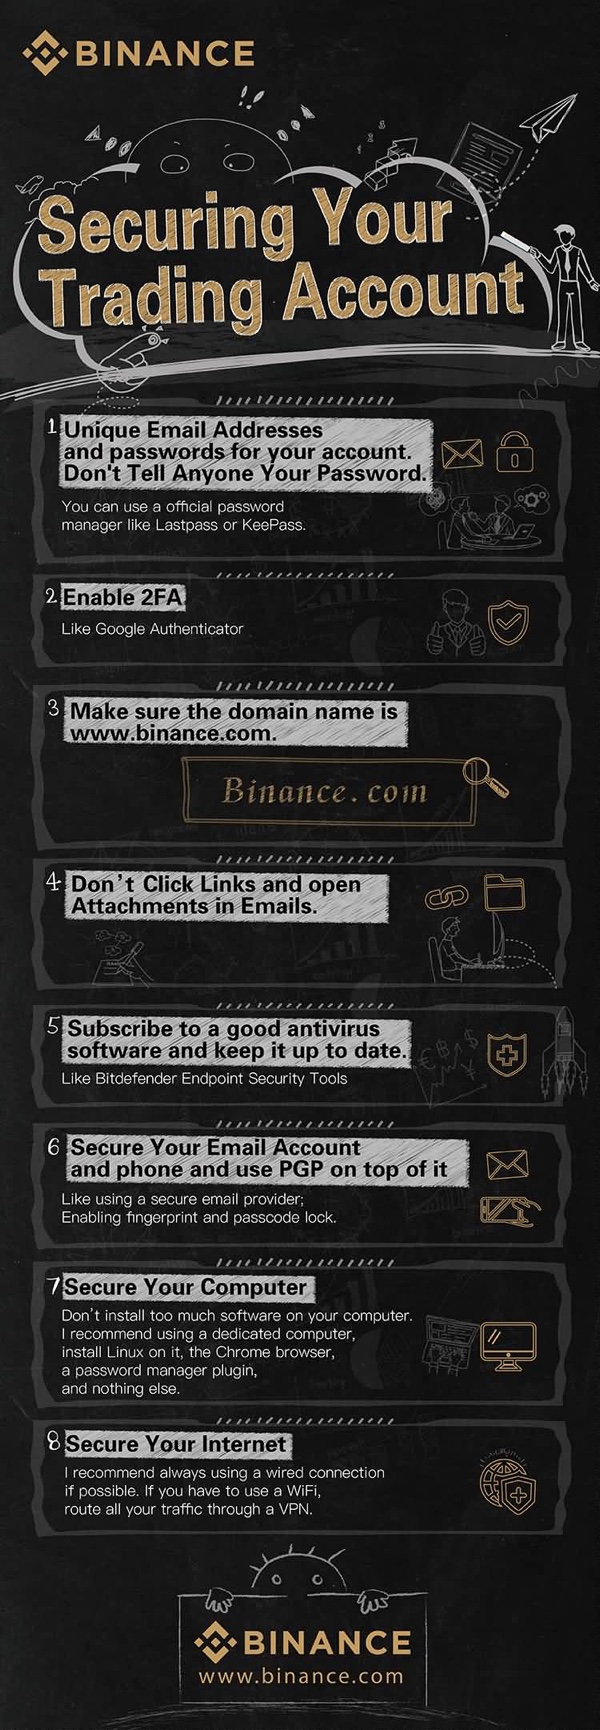 Securing Your CryptoCurrency Trading Account infographic